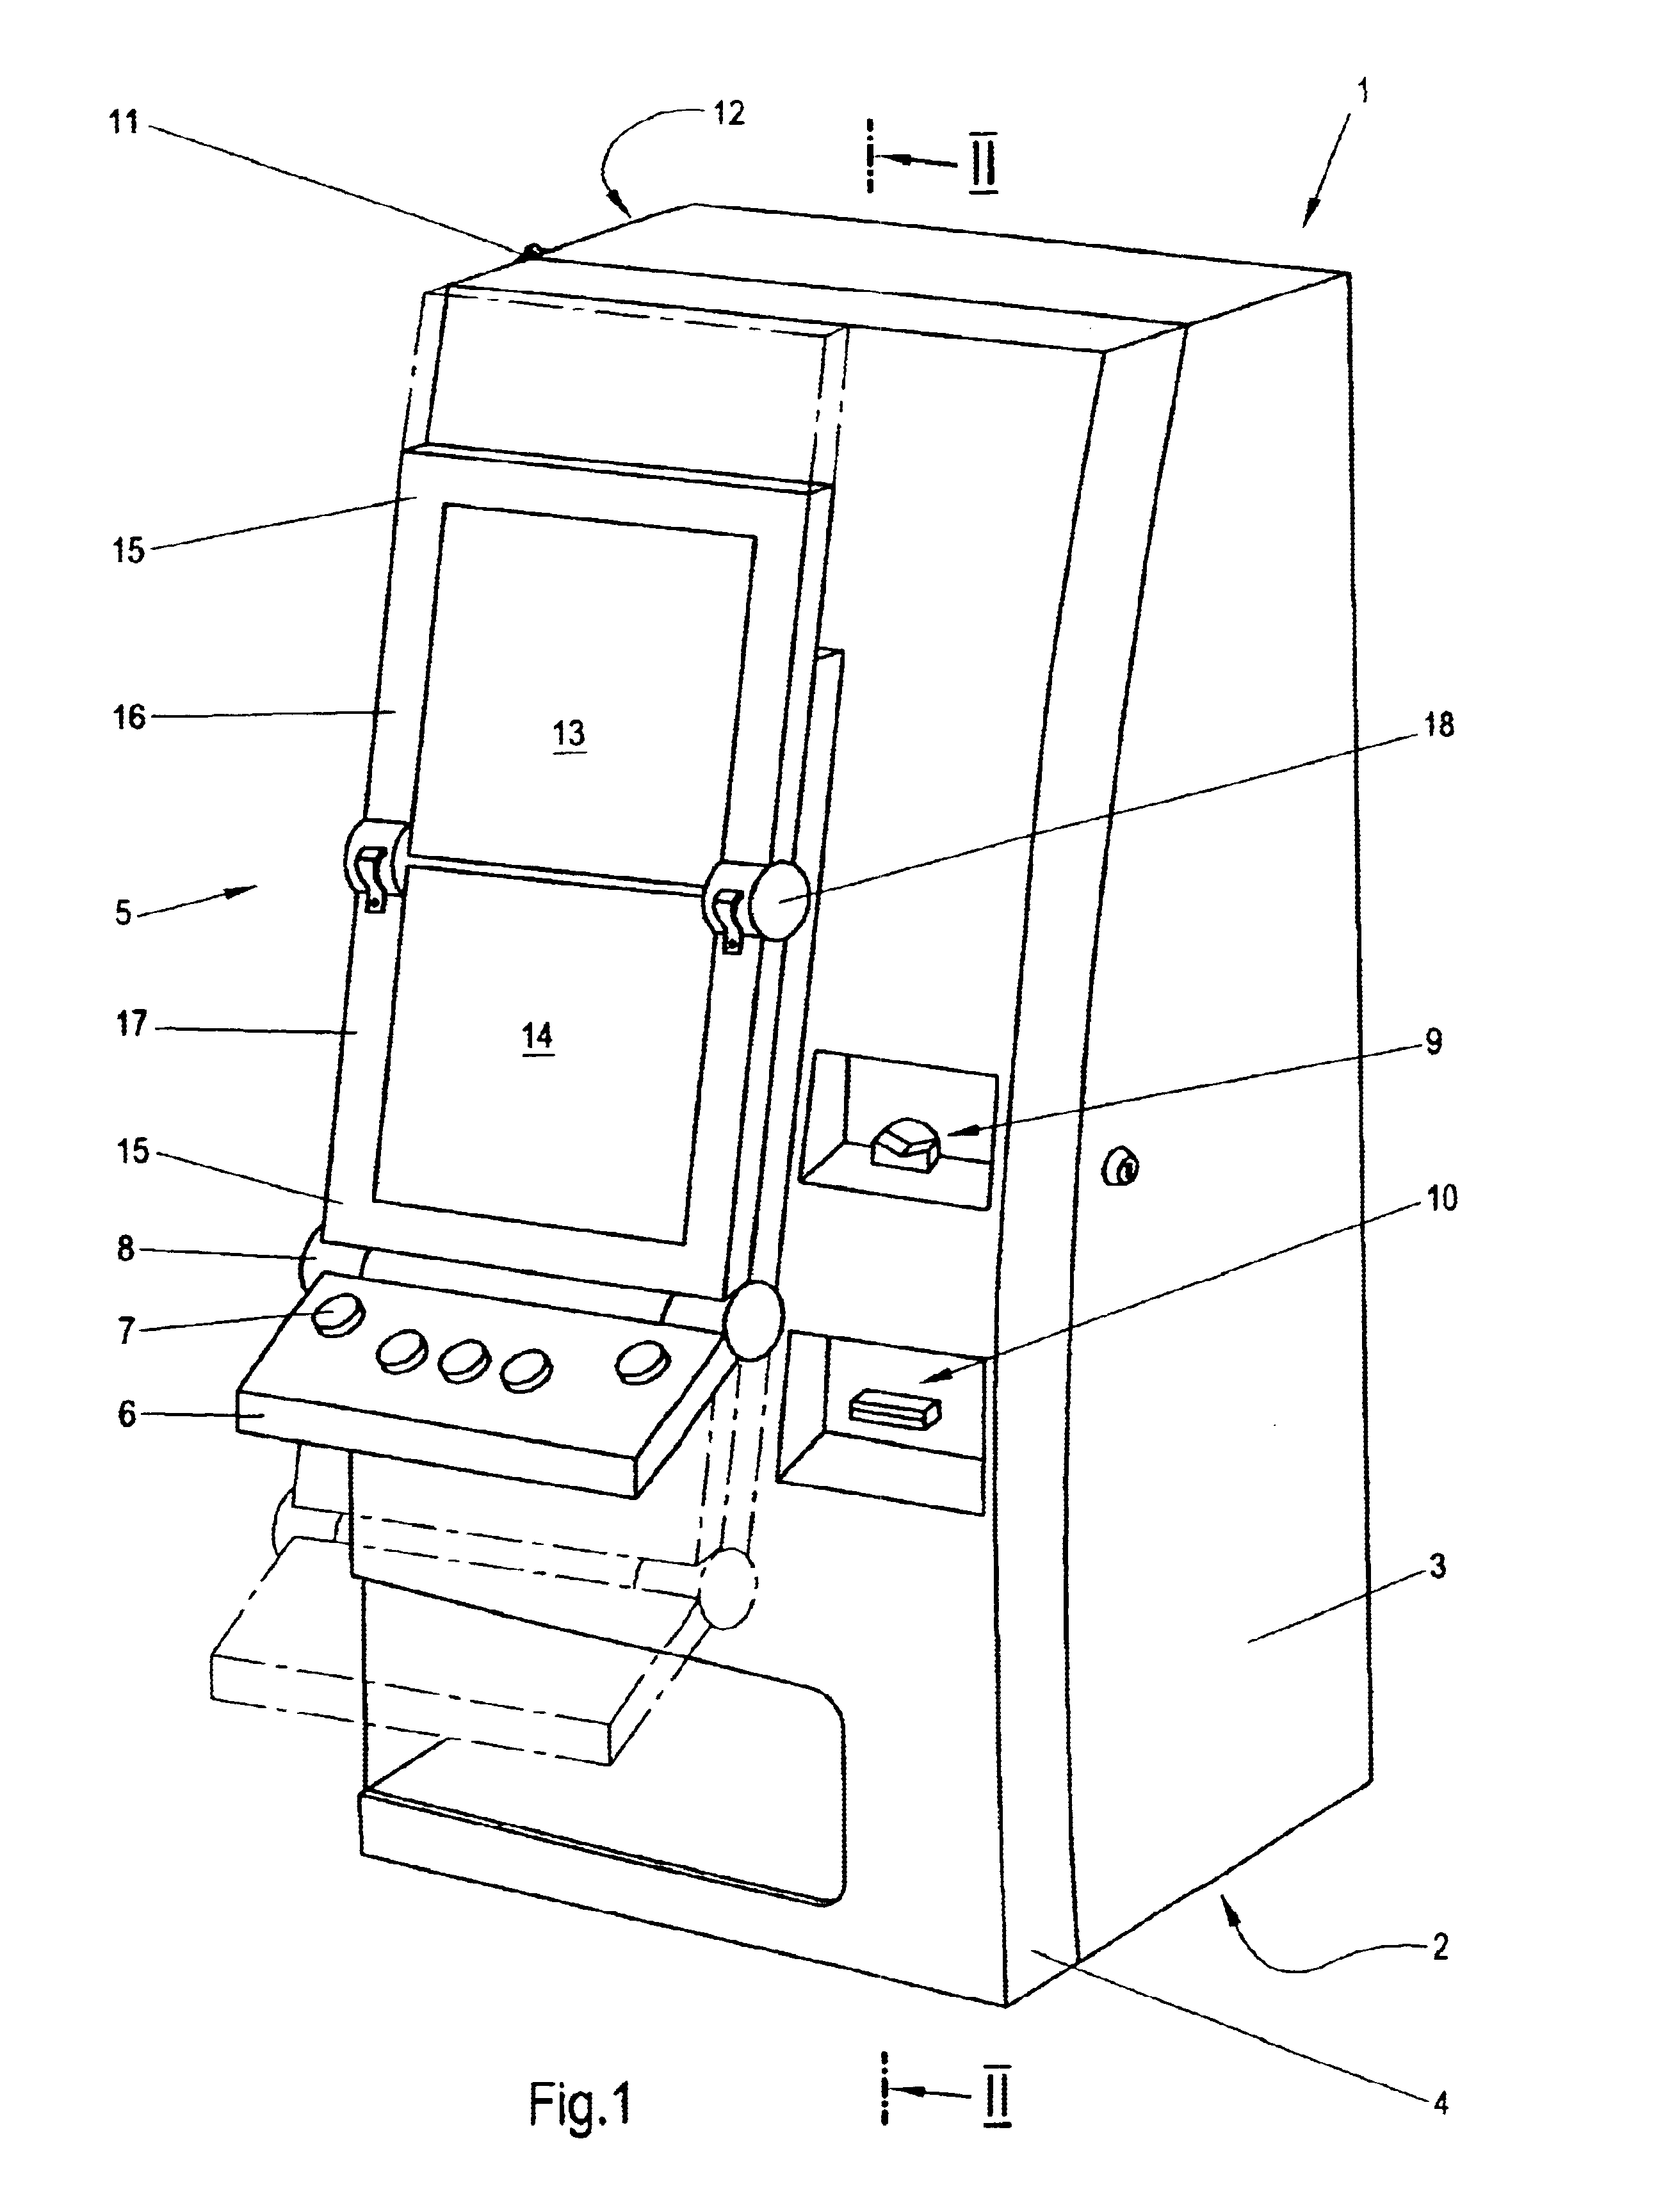 Apparatus for positioning a symbol display device onto a door element of a casing of a coin operated entertainment automat